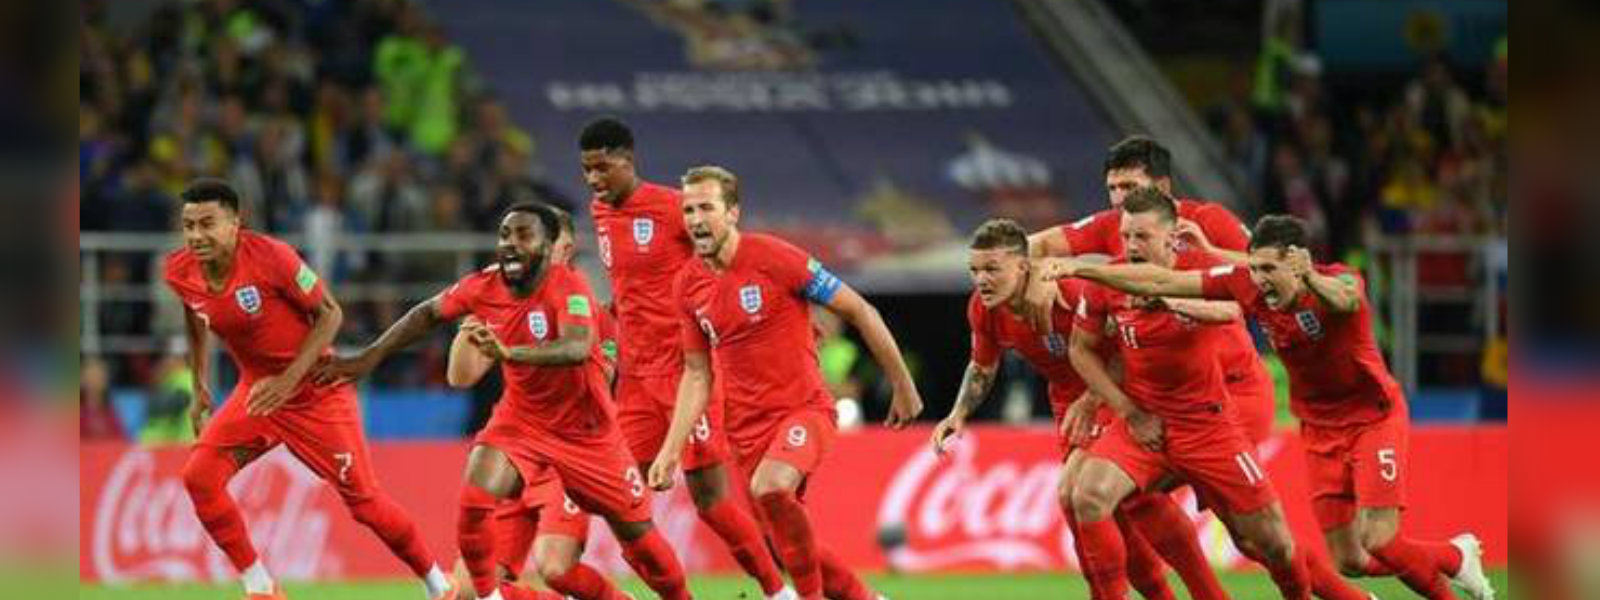 England beats Colombia to enter Quarter-Finals 